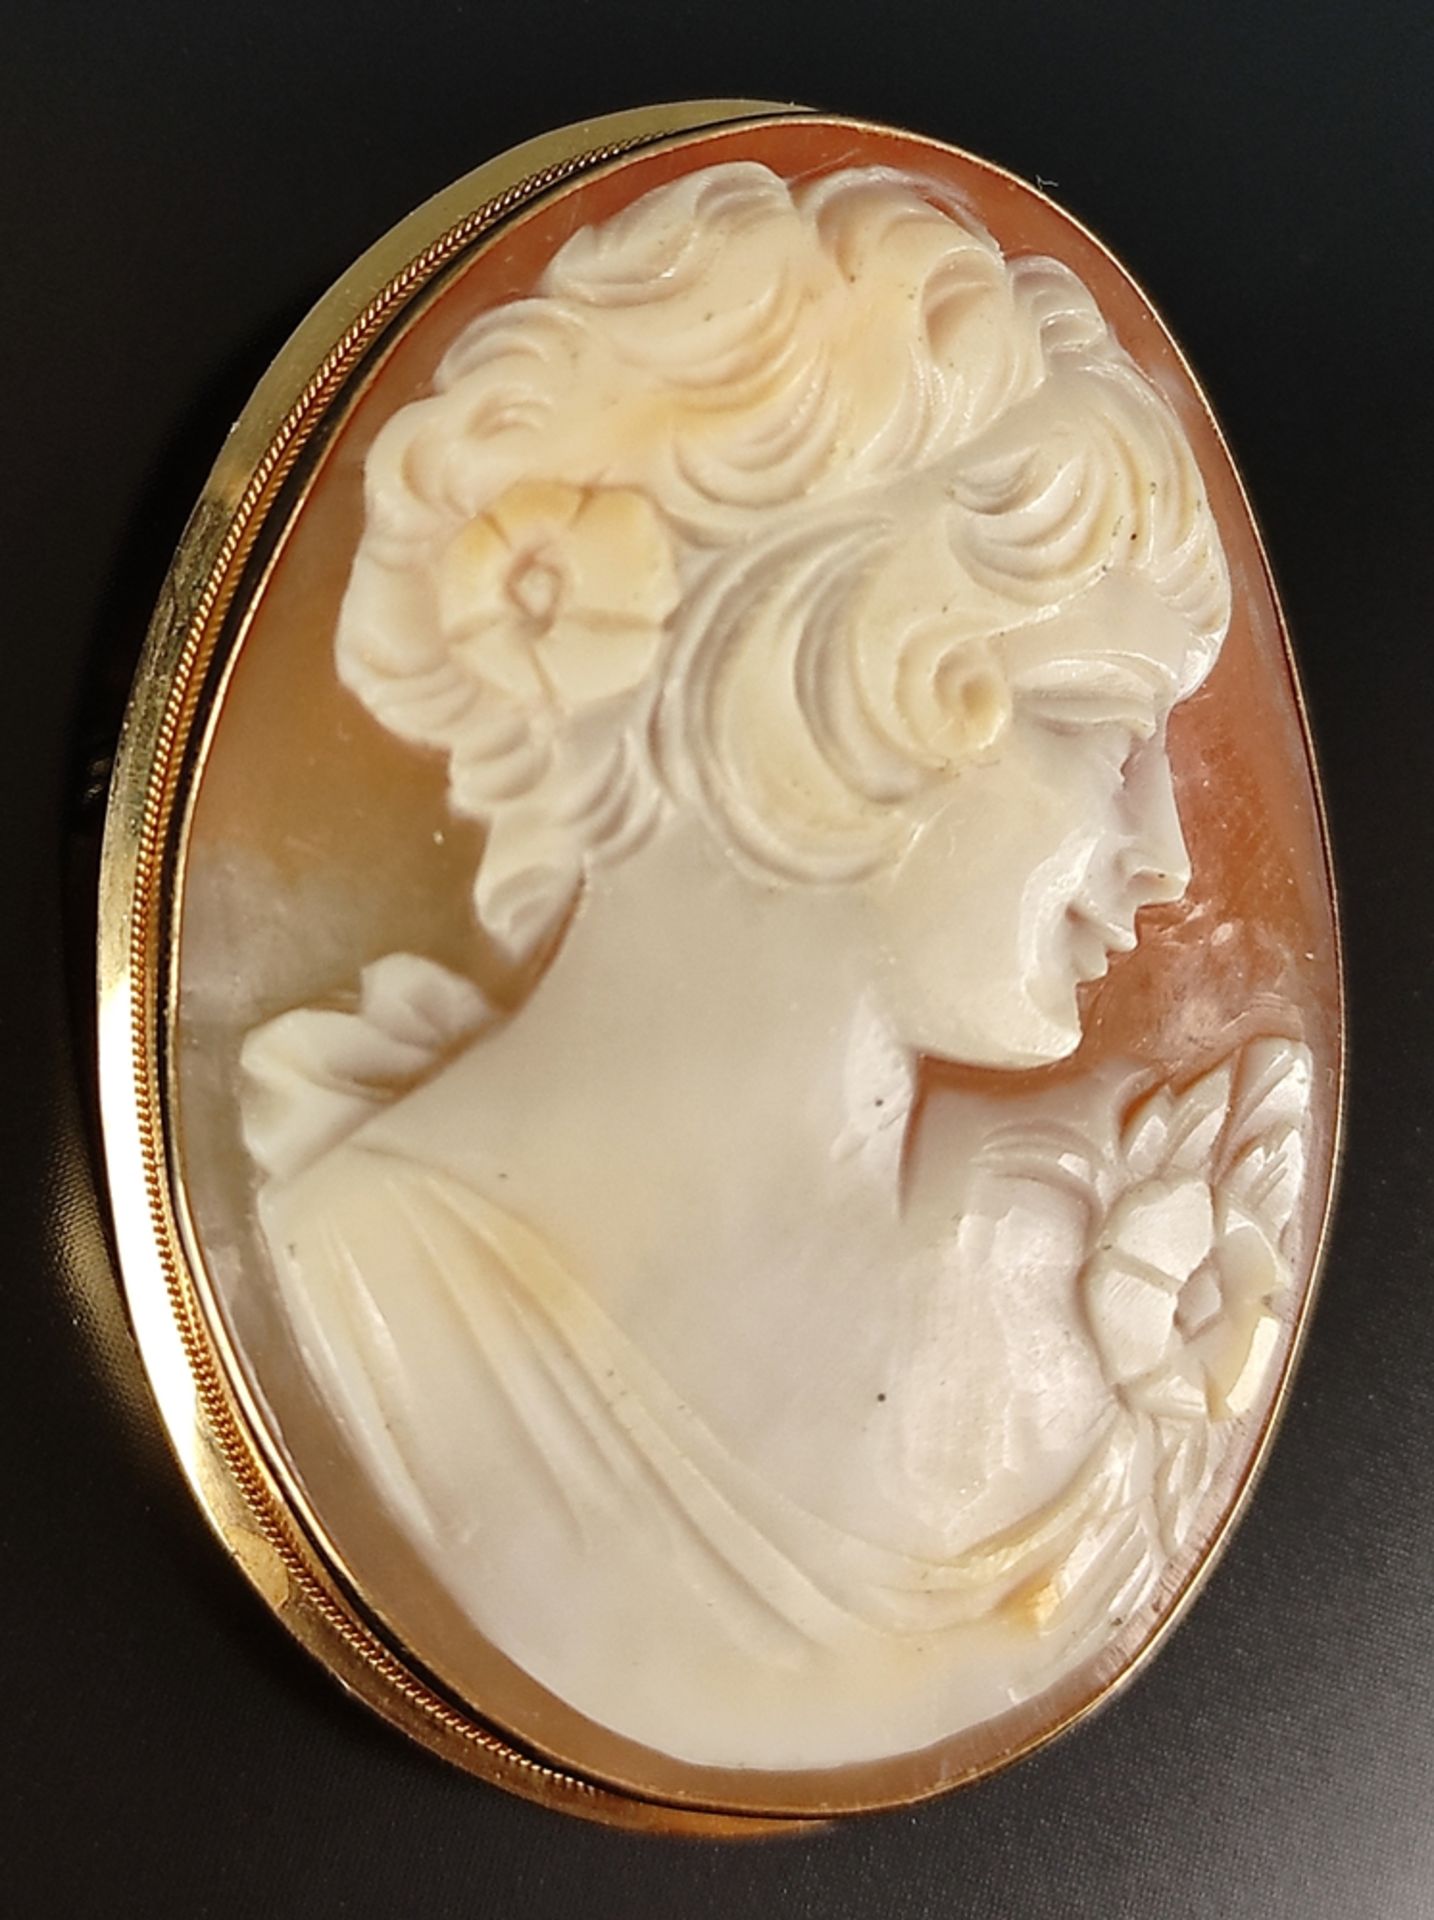 Shell cameo pendant/brooch, with girl profile, set in 750/18K yellow gold (tested), 19th century, - Image 3 of 4